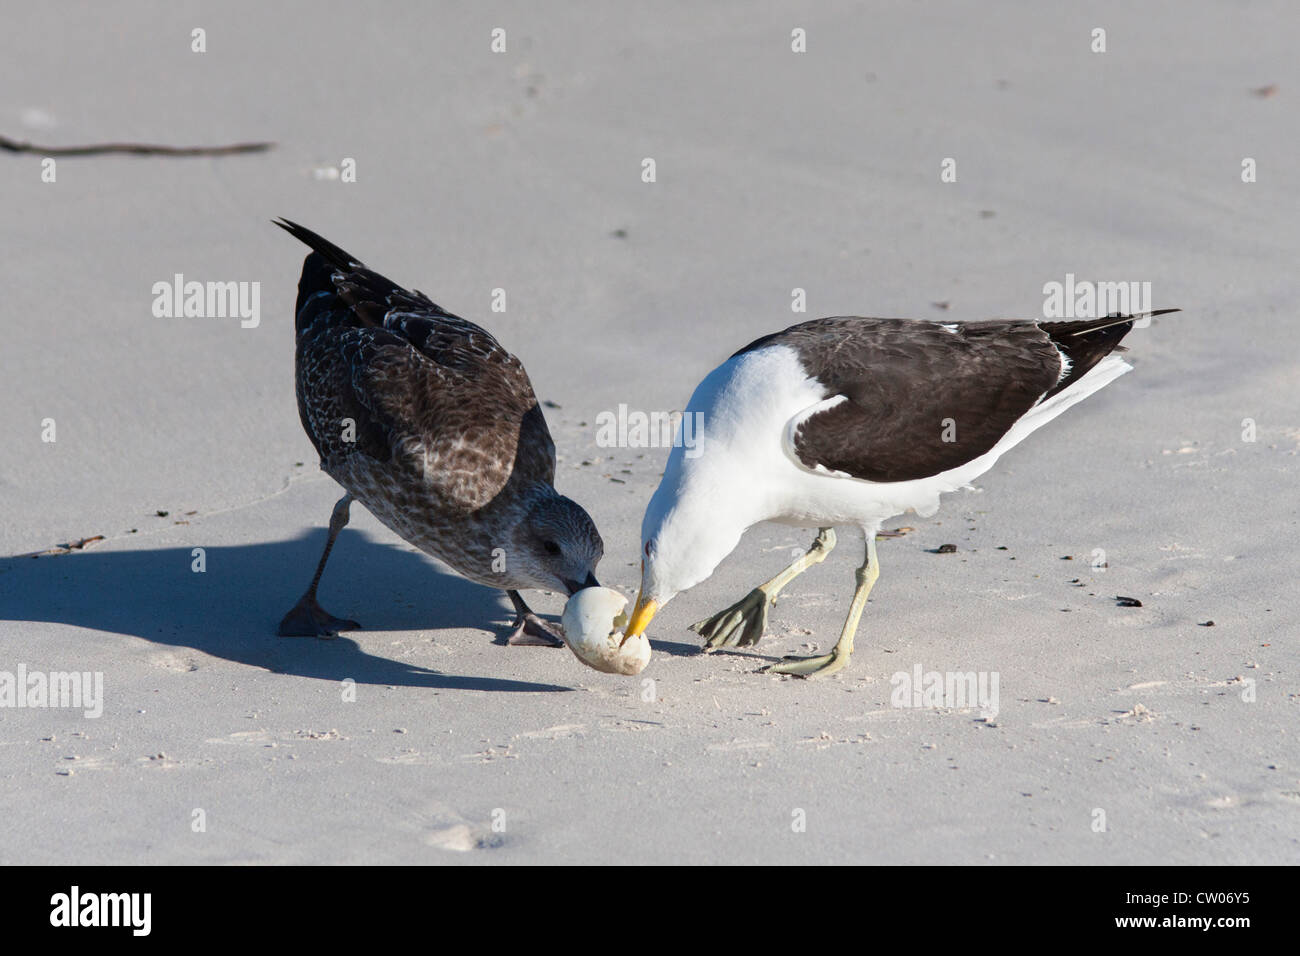 Cape gulls, Larus vetula, eating African penguin egg, Cape Town, South Africa Stock Photo